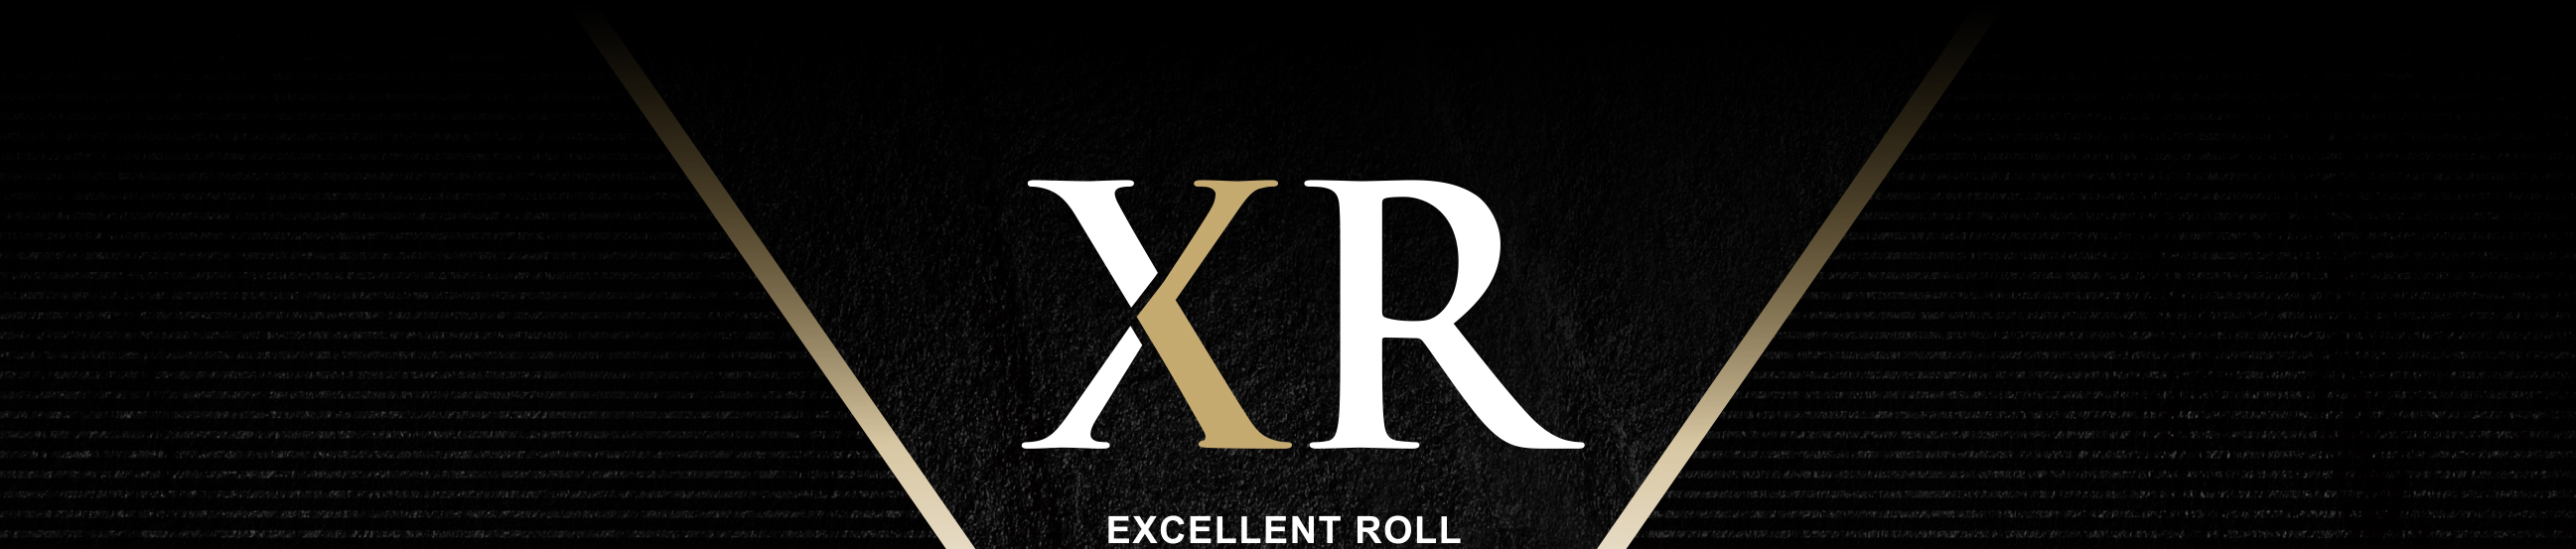 XR EXCELLENT ROLL